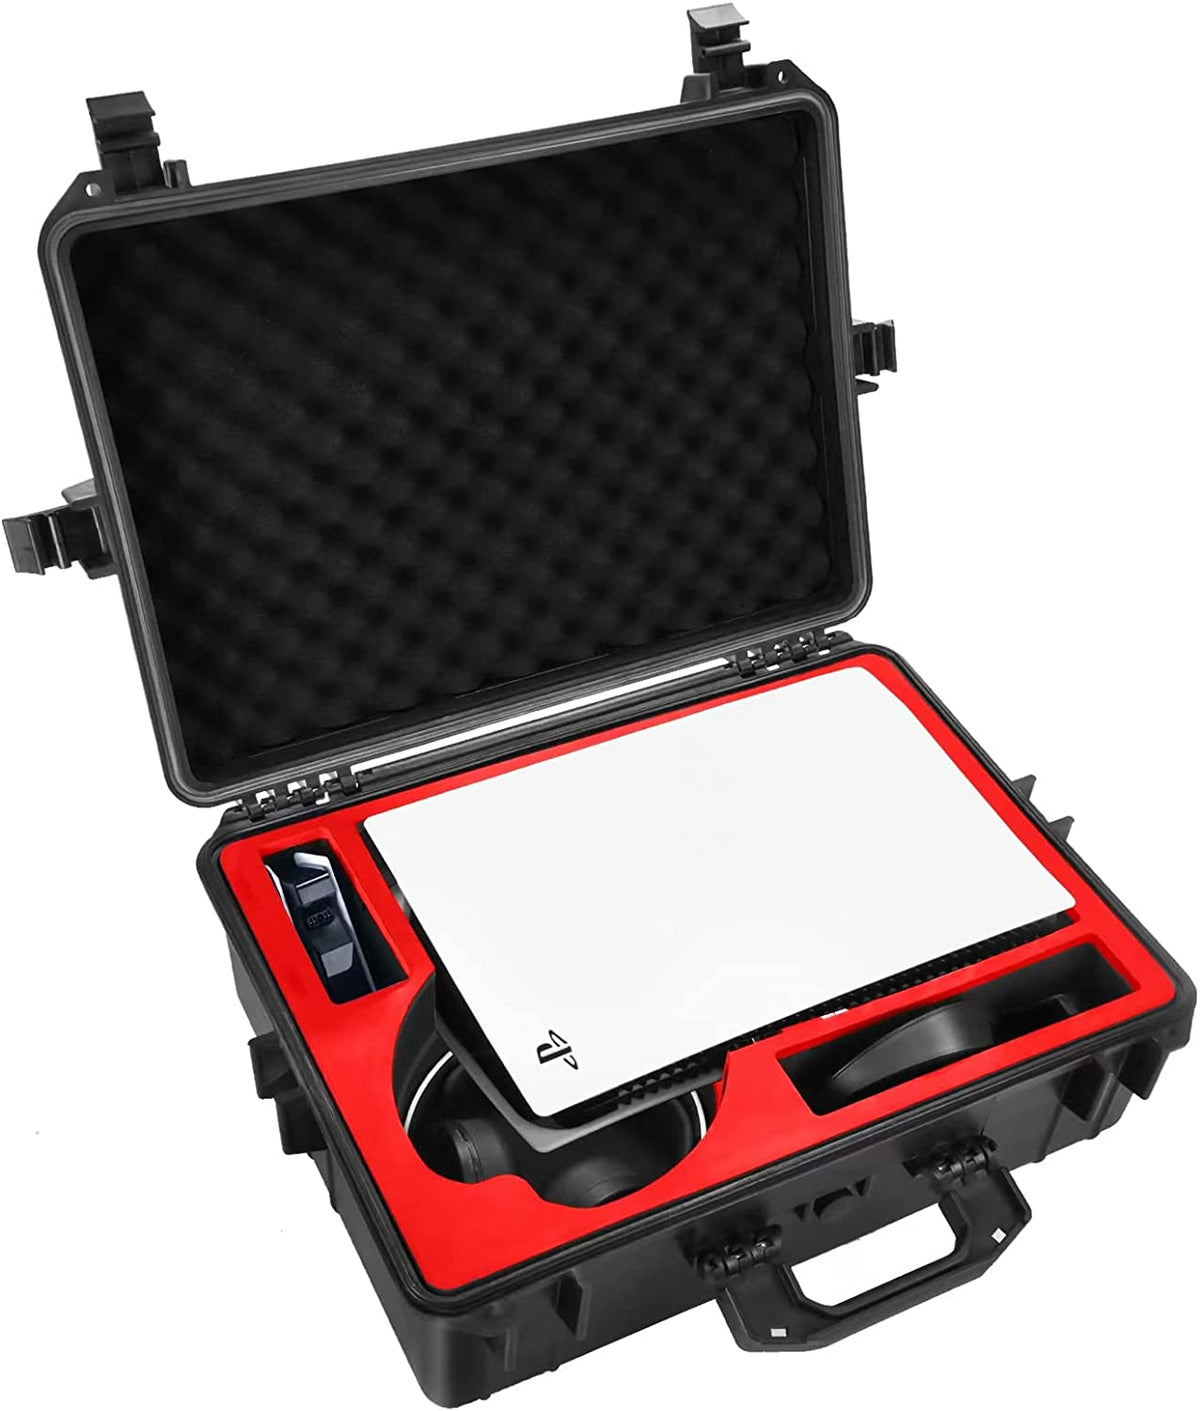 Premium Waterproof Travel Hard Case for PS5 - Heavy Duty Carrying Case Fits Playstation 5 Console, Headset, 2 Controllers, Games, Stand, Dualsense Charging Station, Cables and Other Accessories, Red